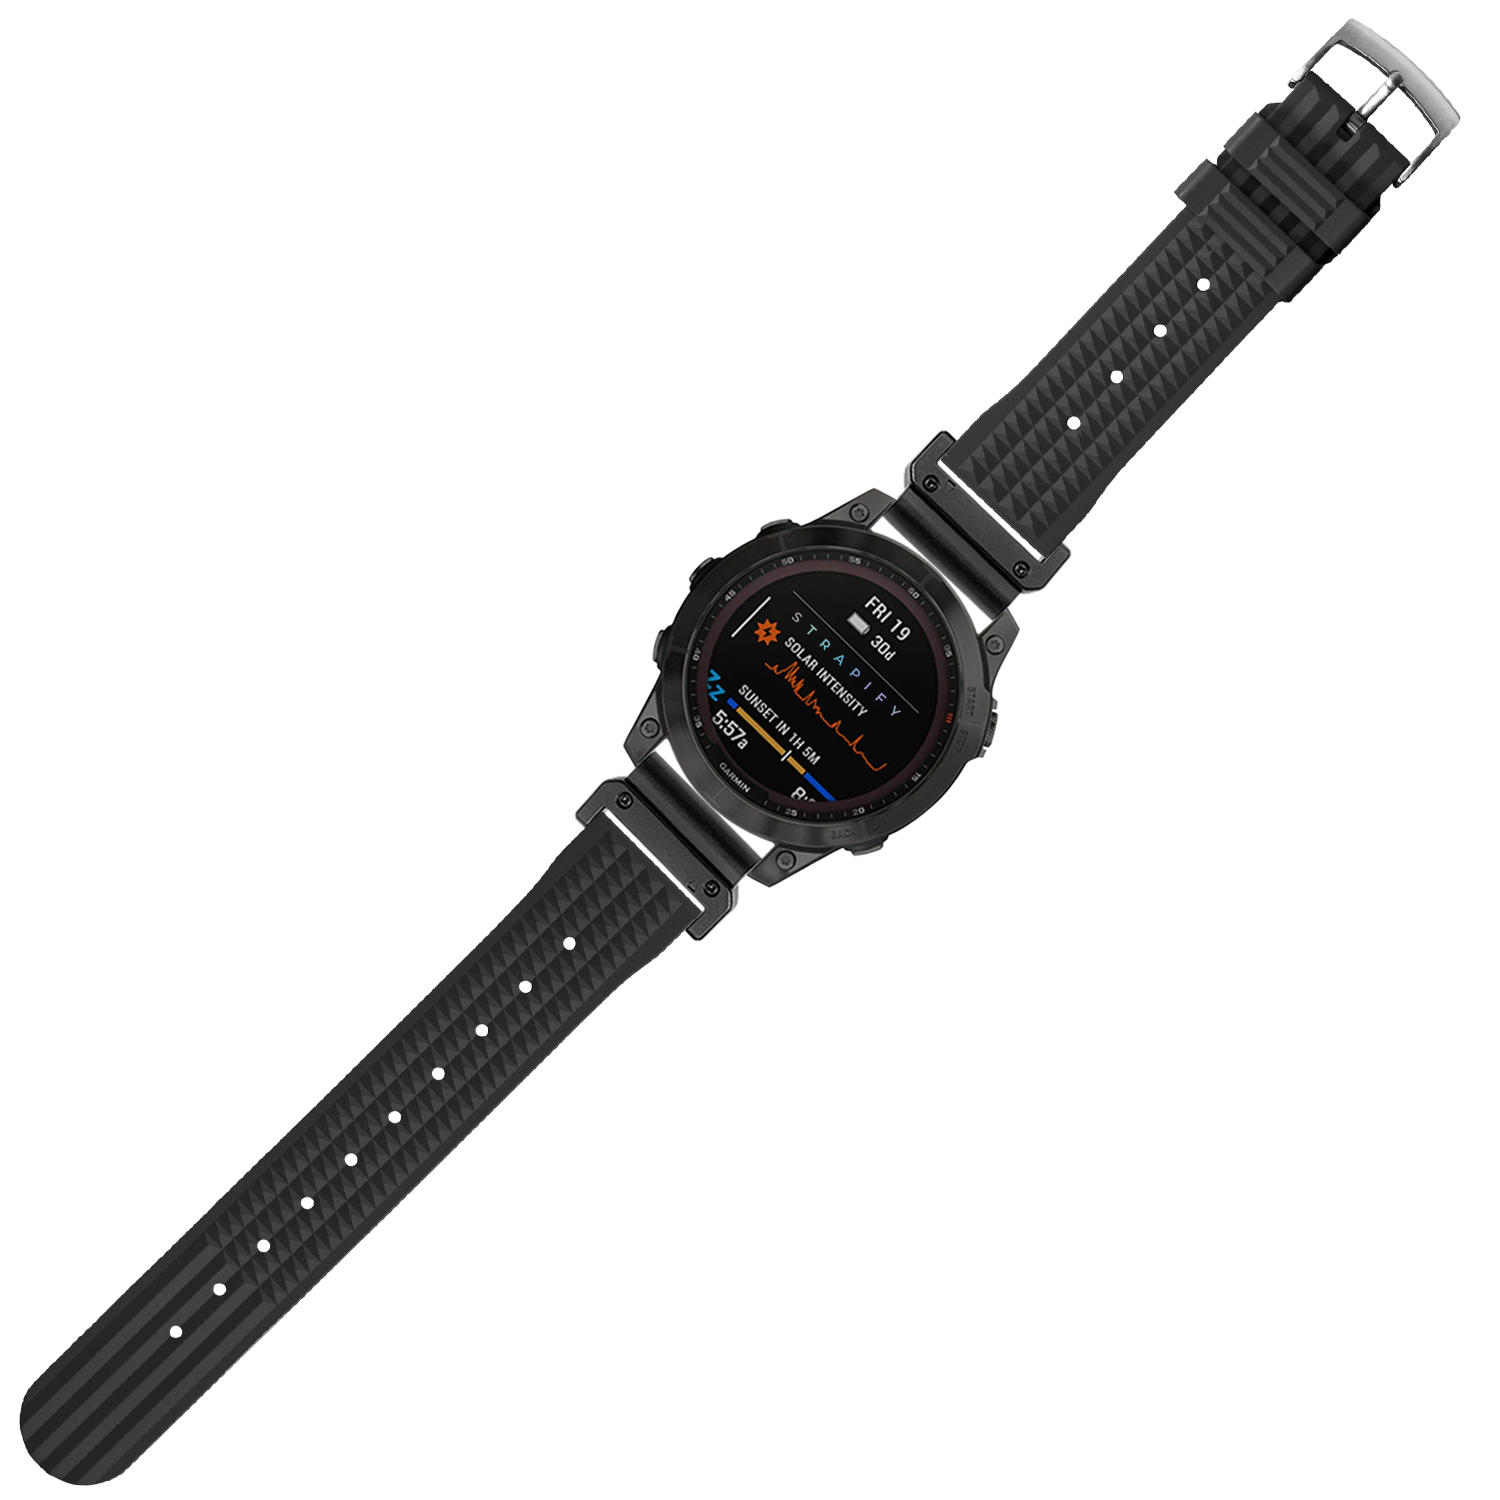 [QuickFit] King Waffle FKM Rubber - Black 26mm